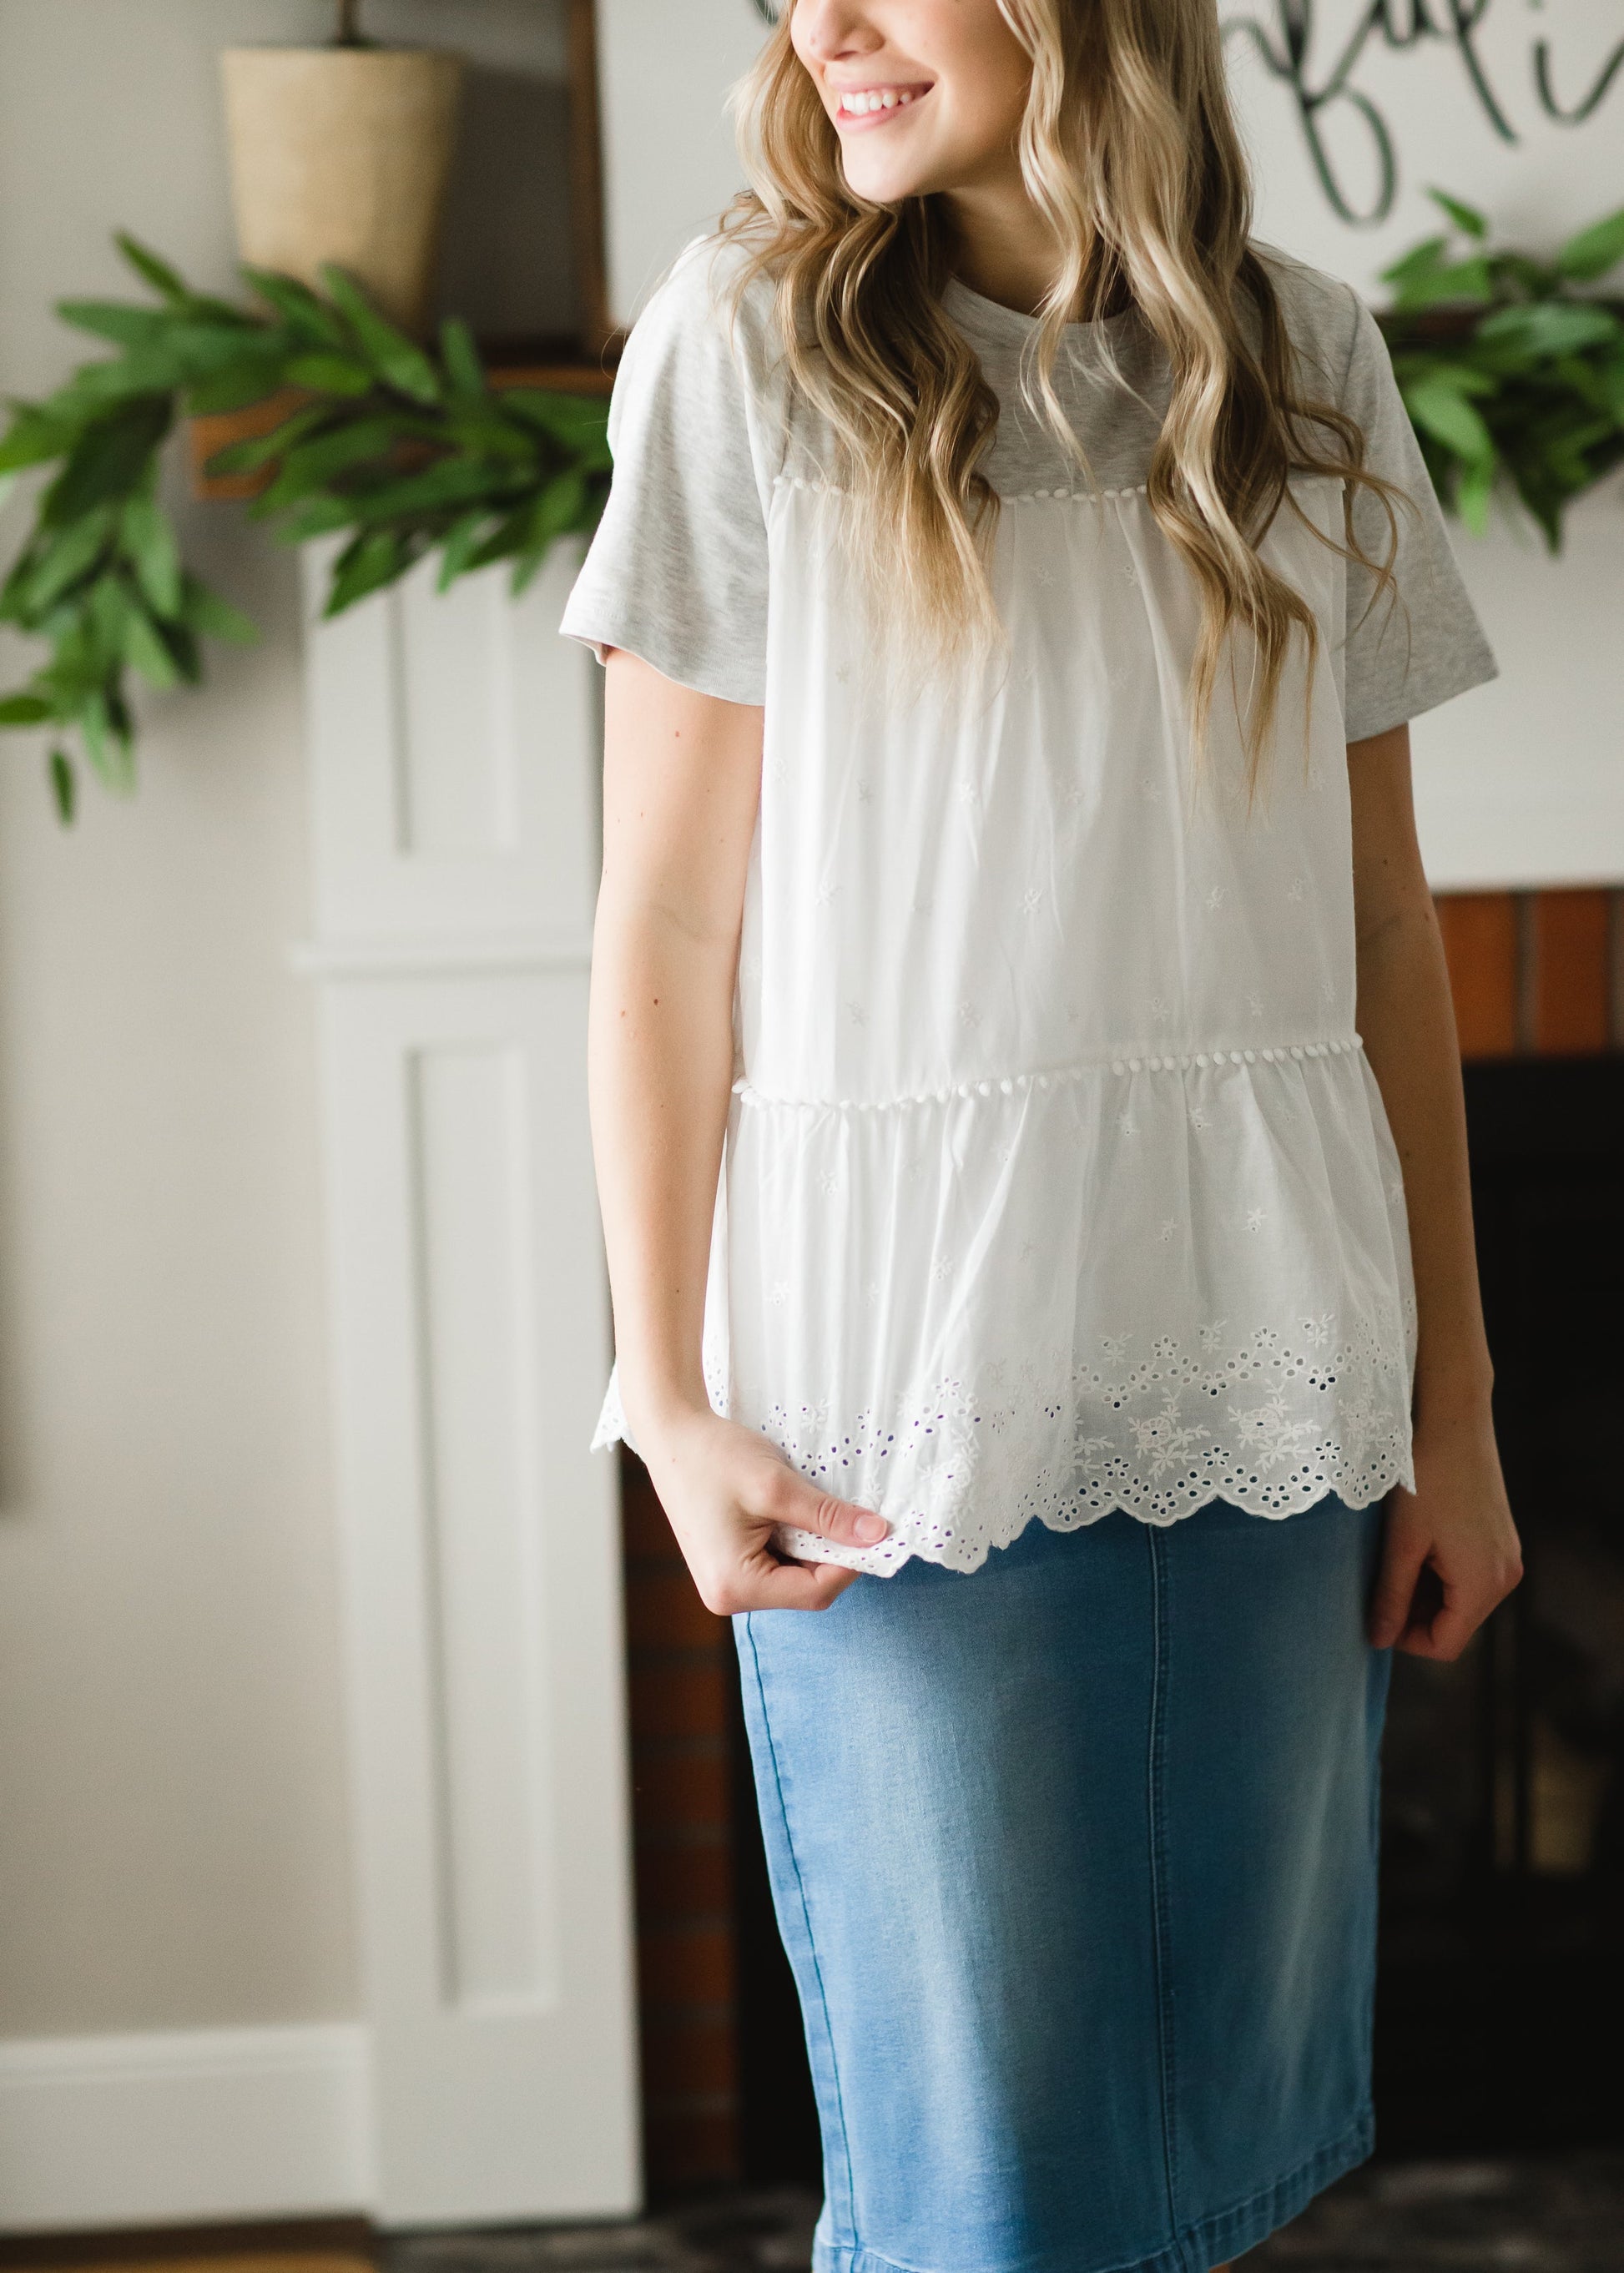 Heather Gray Eyelet Top - FINAL SALE Tops